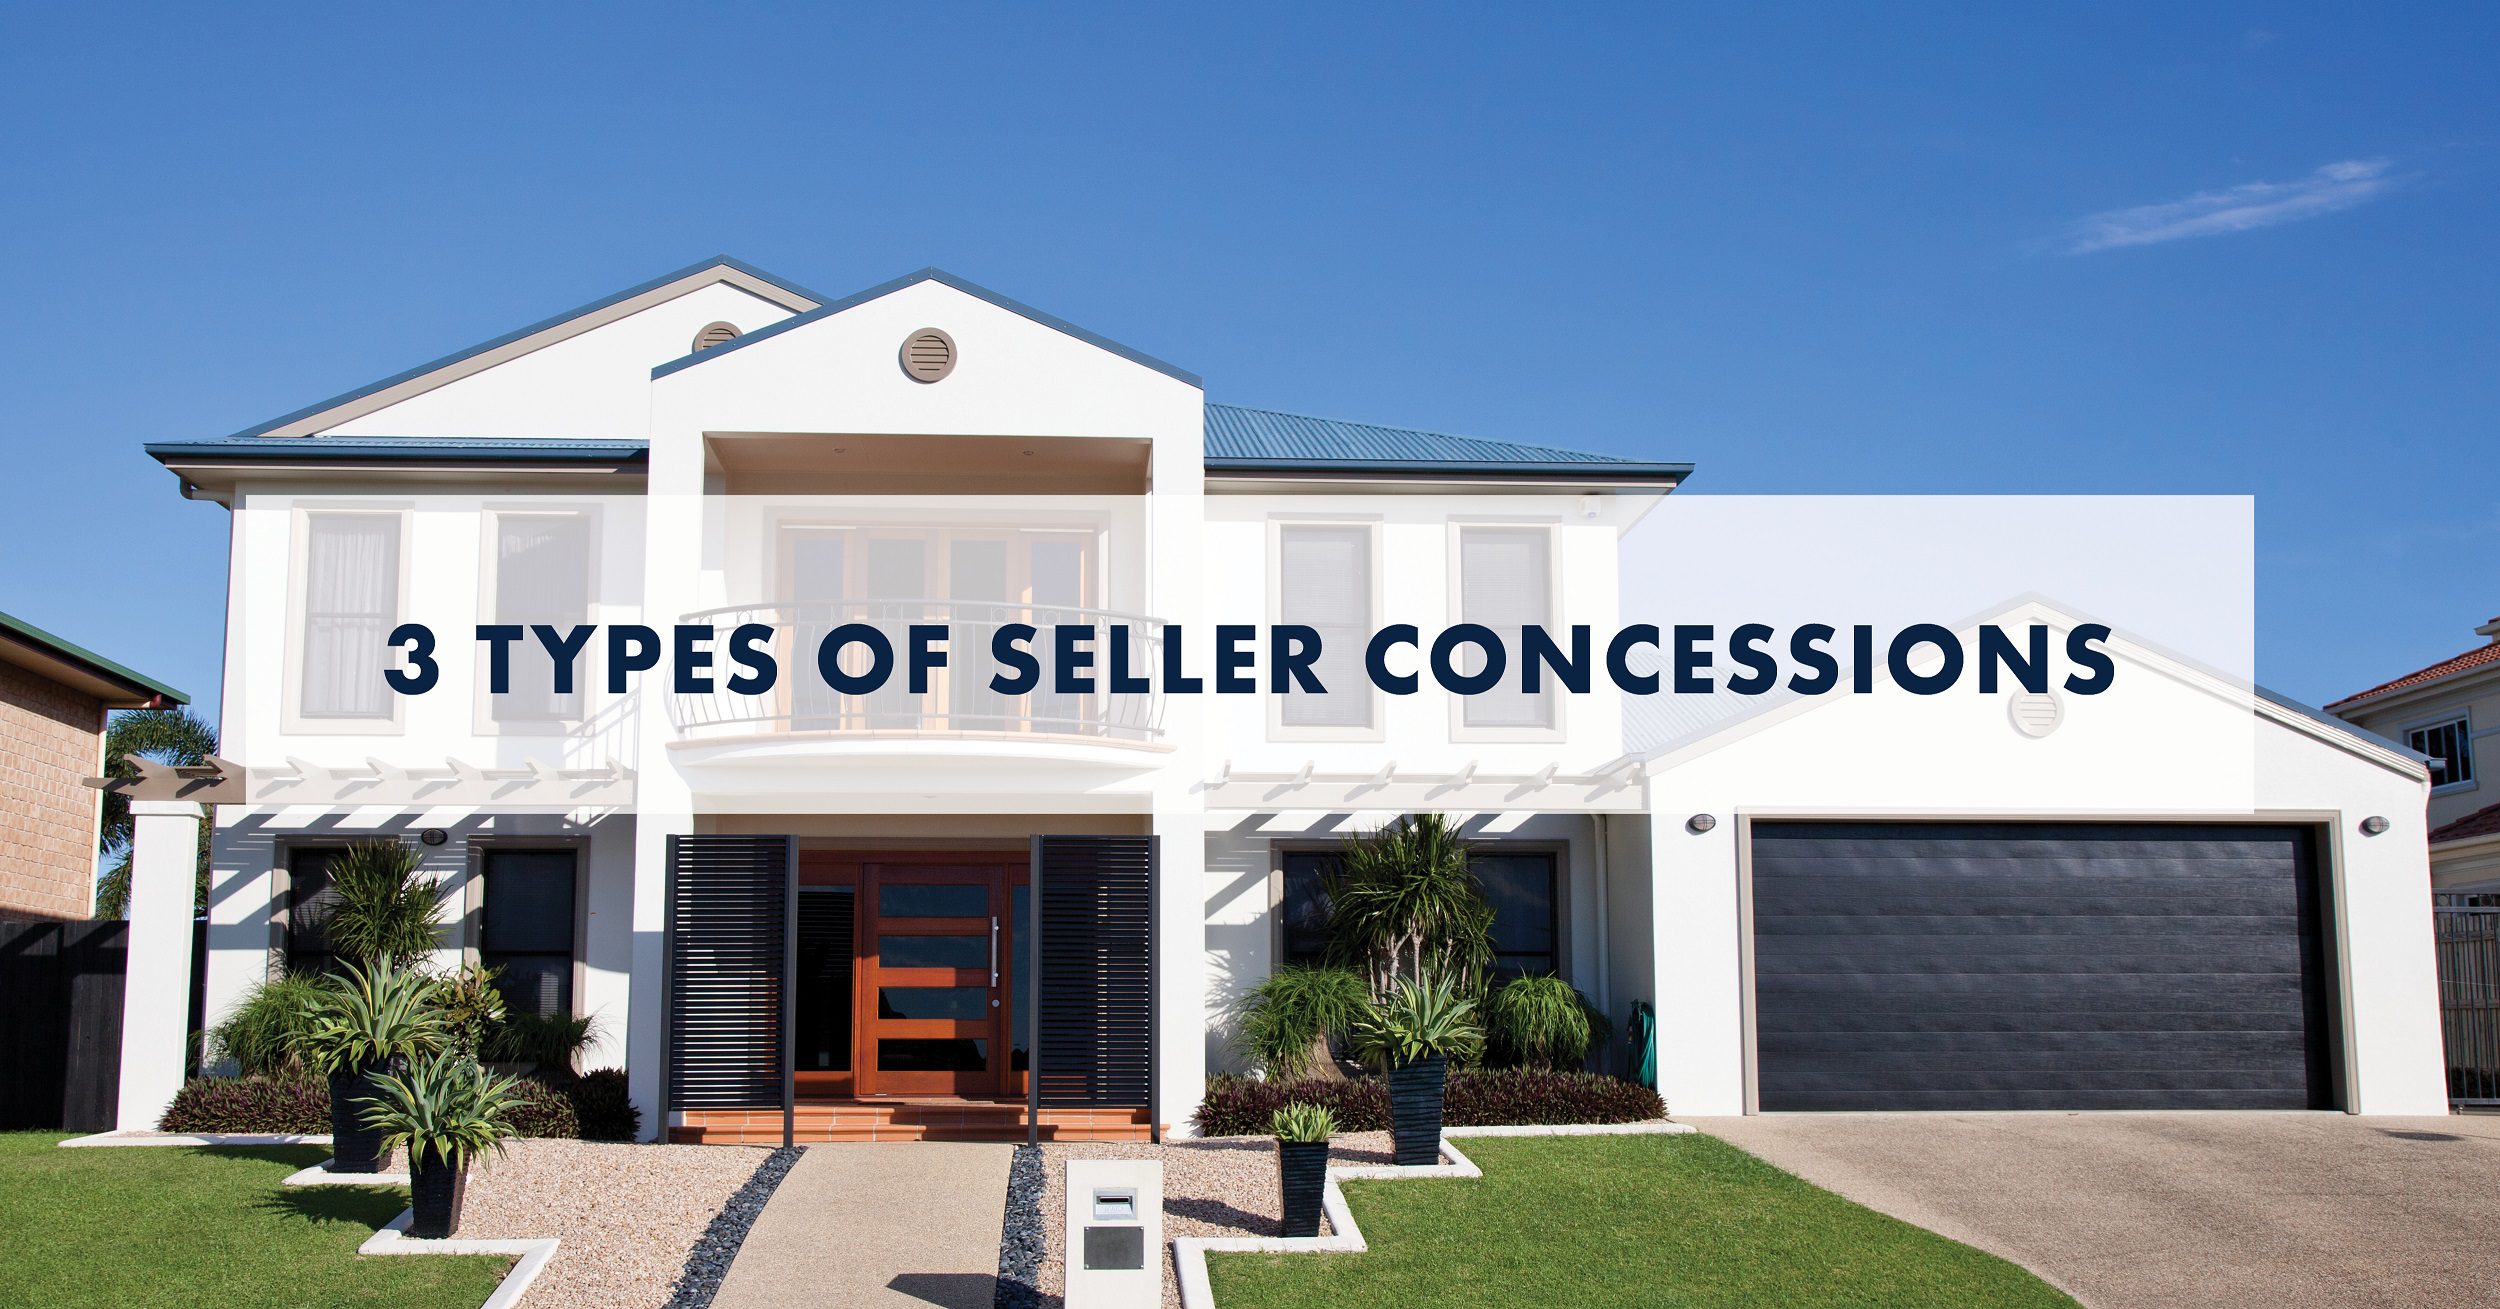 3 Types of Seller Concessions